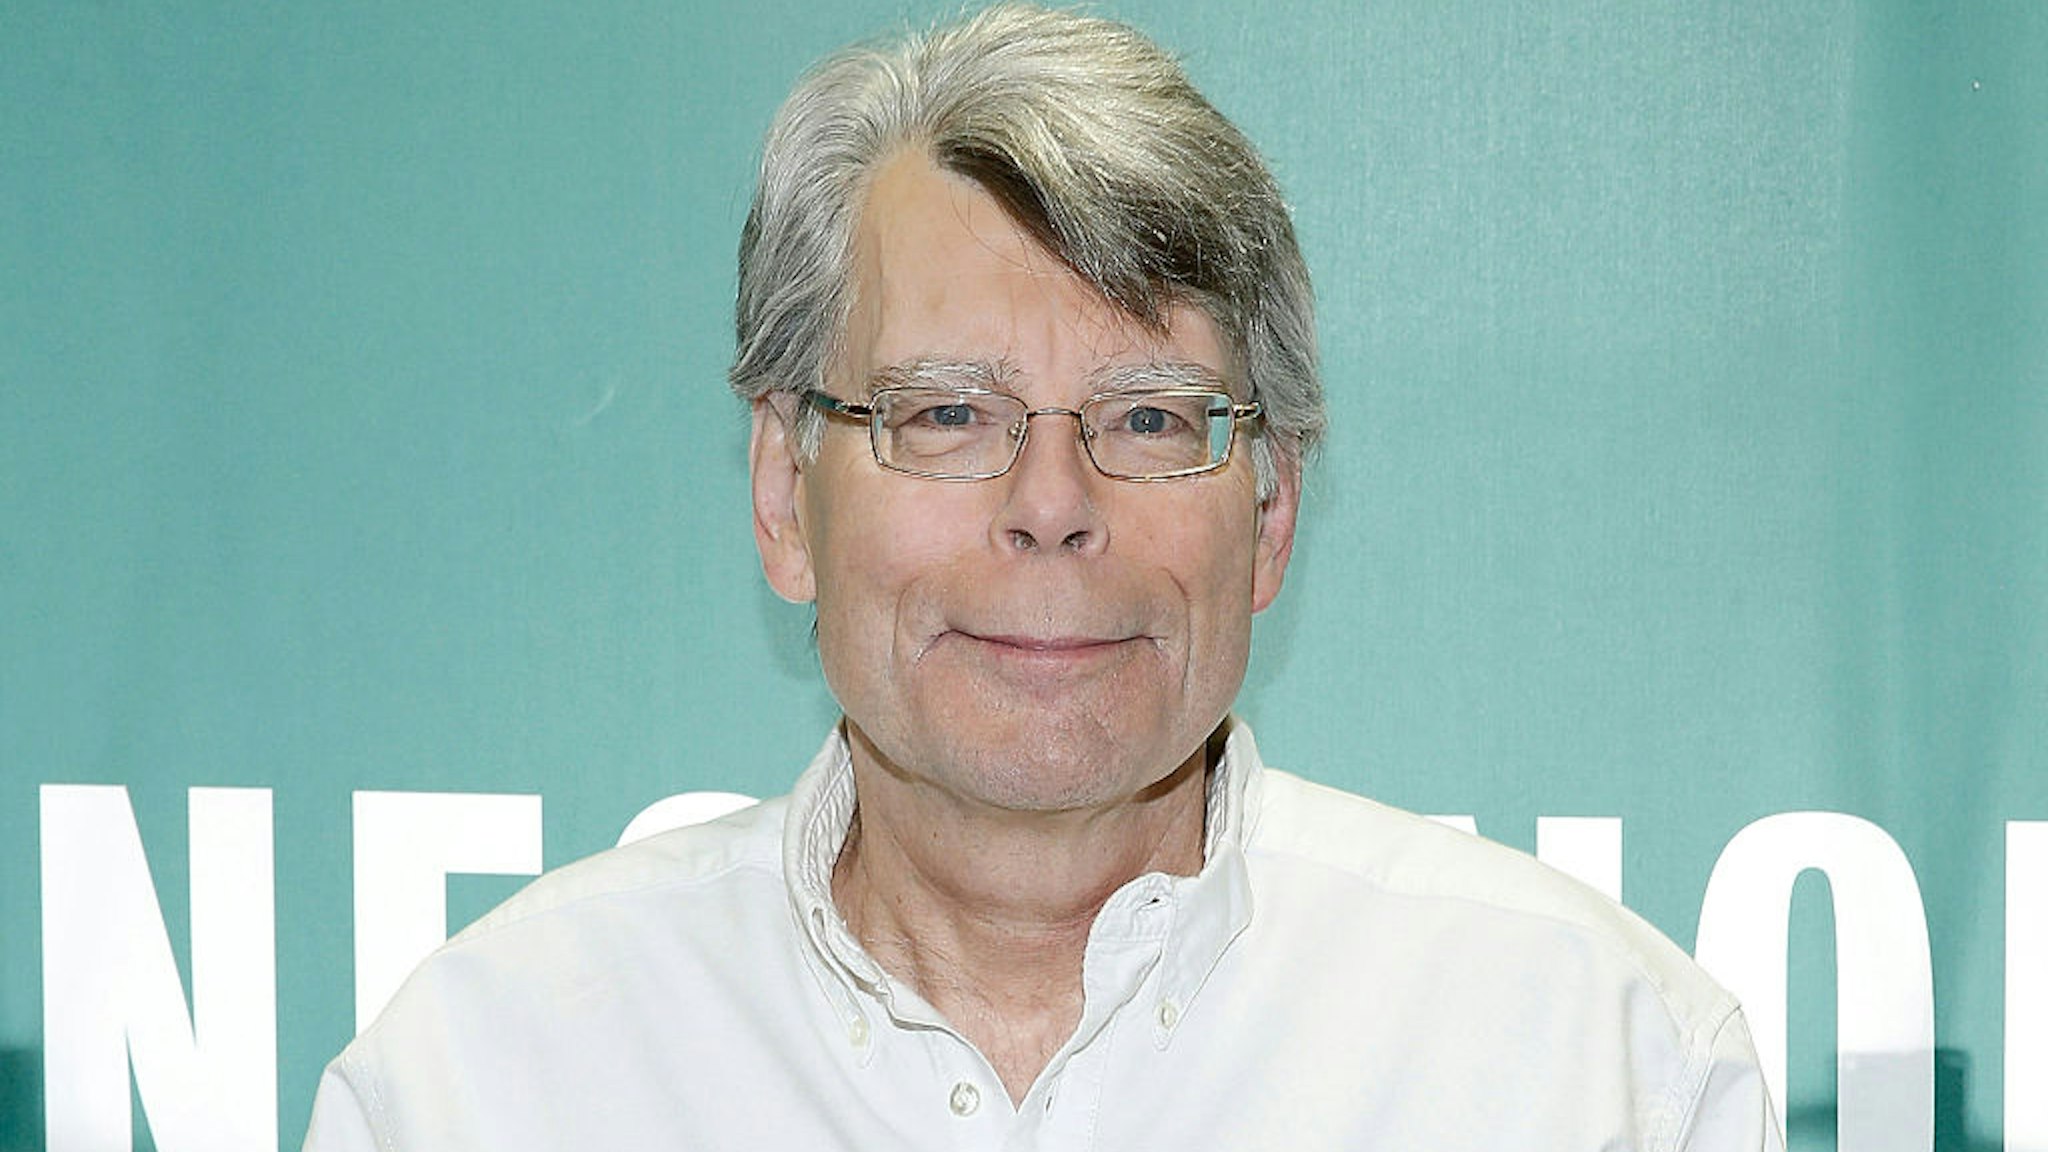 Stephen King Signs Copies Of His Book "Revival" at Barnes &amp; Noble Union Square on November 11, 2014 in New York City.